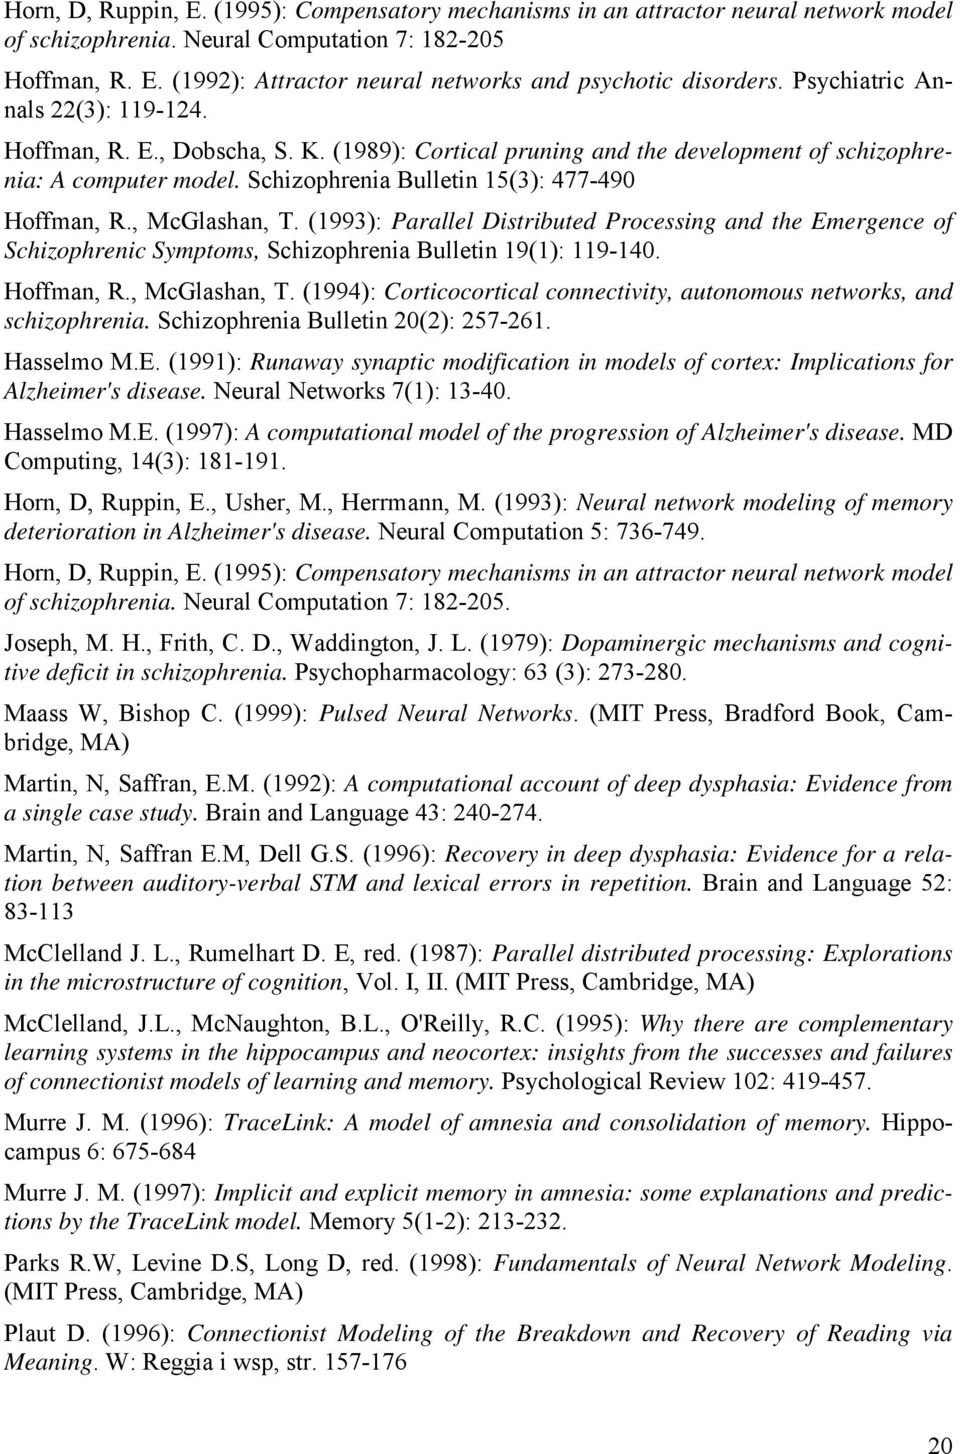 , McGlashan, T. (1993): Parallel Distributed Processing and the Emergence of Schizophrenic Symptoms, Schizophrenia Bulletin 19(1): 119-140. Hoffman, R., McGlashan, T. (1994): Corticocortical connectivity, autonomous networks, and schizophrenia.